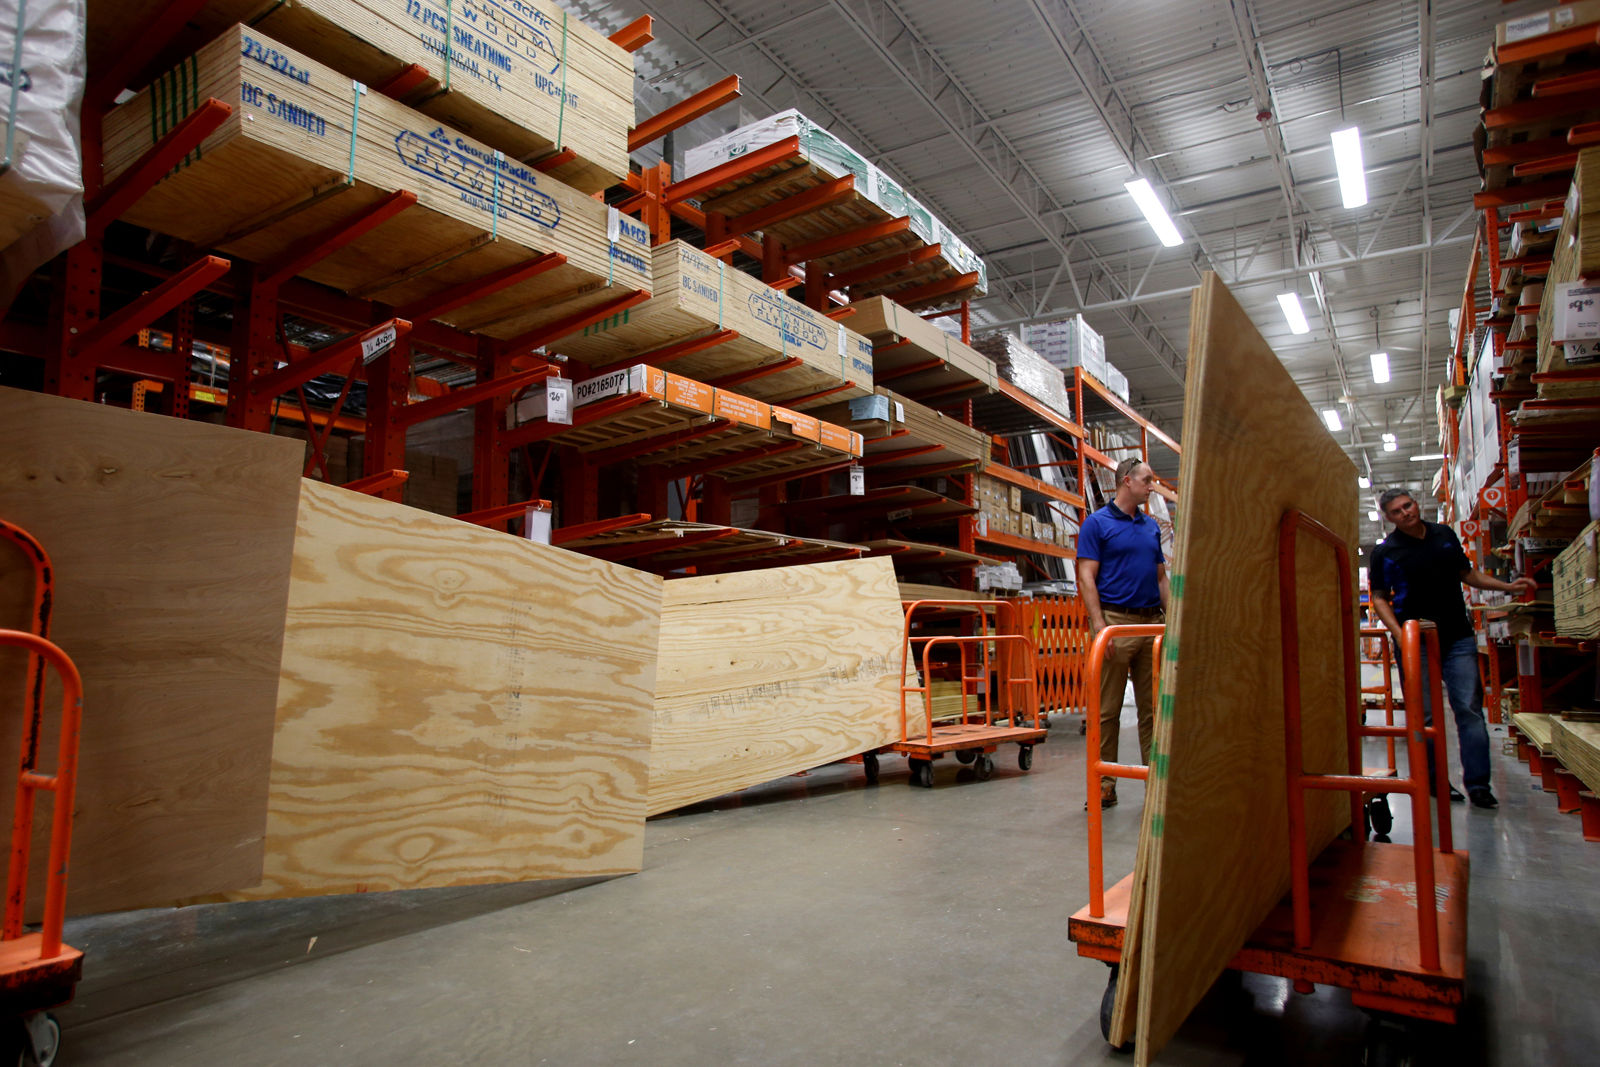 TAMPA, FL - SEPTEMBER 05:  Shoppers gather plywood for makeshift storm shutters at a Home Depot store as residents in the area prepare ahead of Hurricane Irma on September 5, 2017 in Tampa, Florida. The National Hurricane Center (NHC) has reported that  Hurricane Irma has strengthened to a Category 5 storm as it crosses into the Caribbean and is expected to move on towards Florida.  (Photo by Brian Blanco/Getty Images)